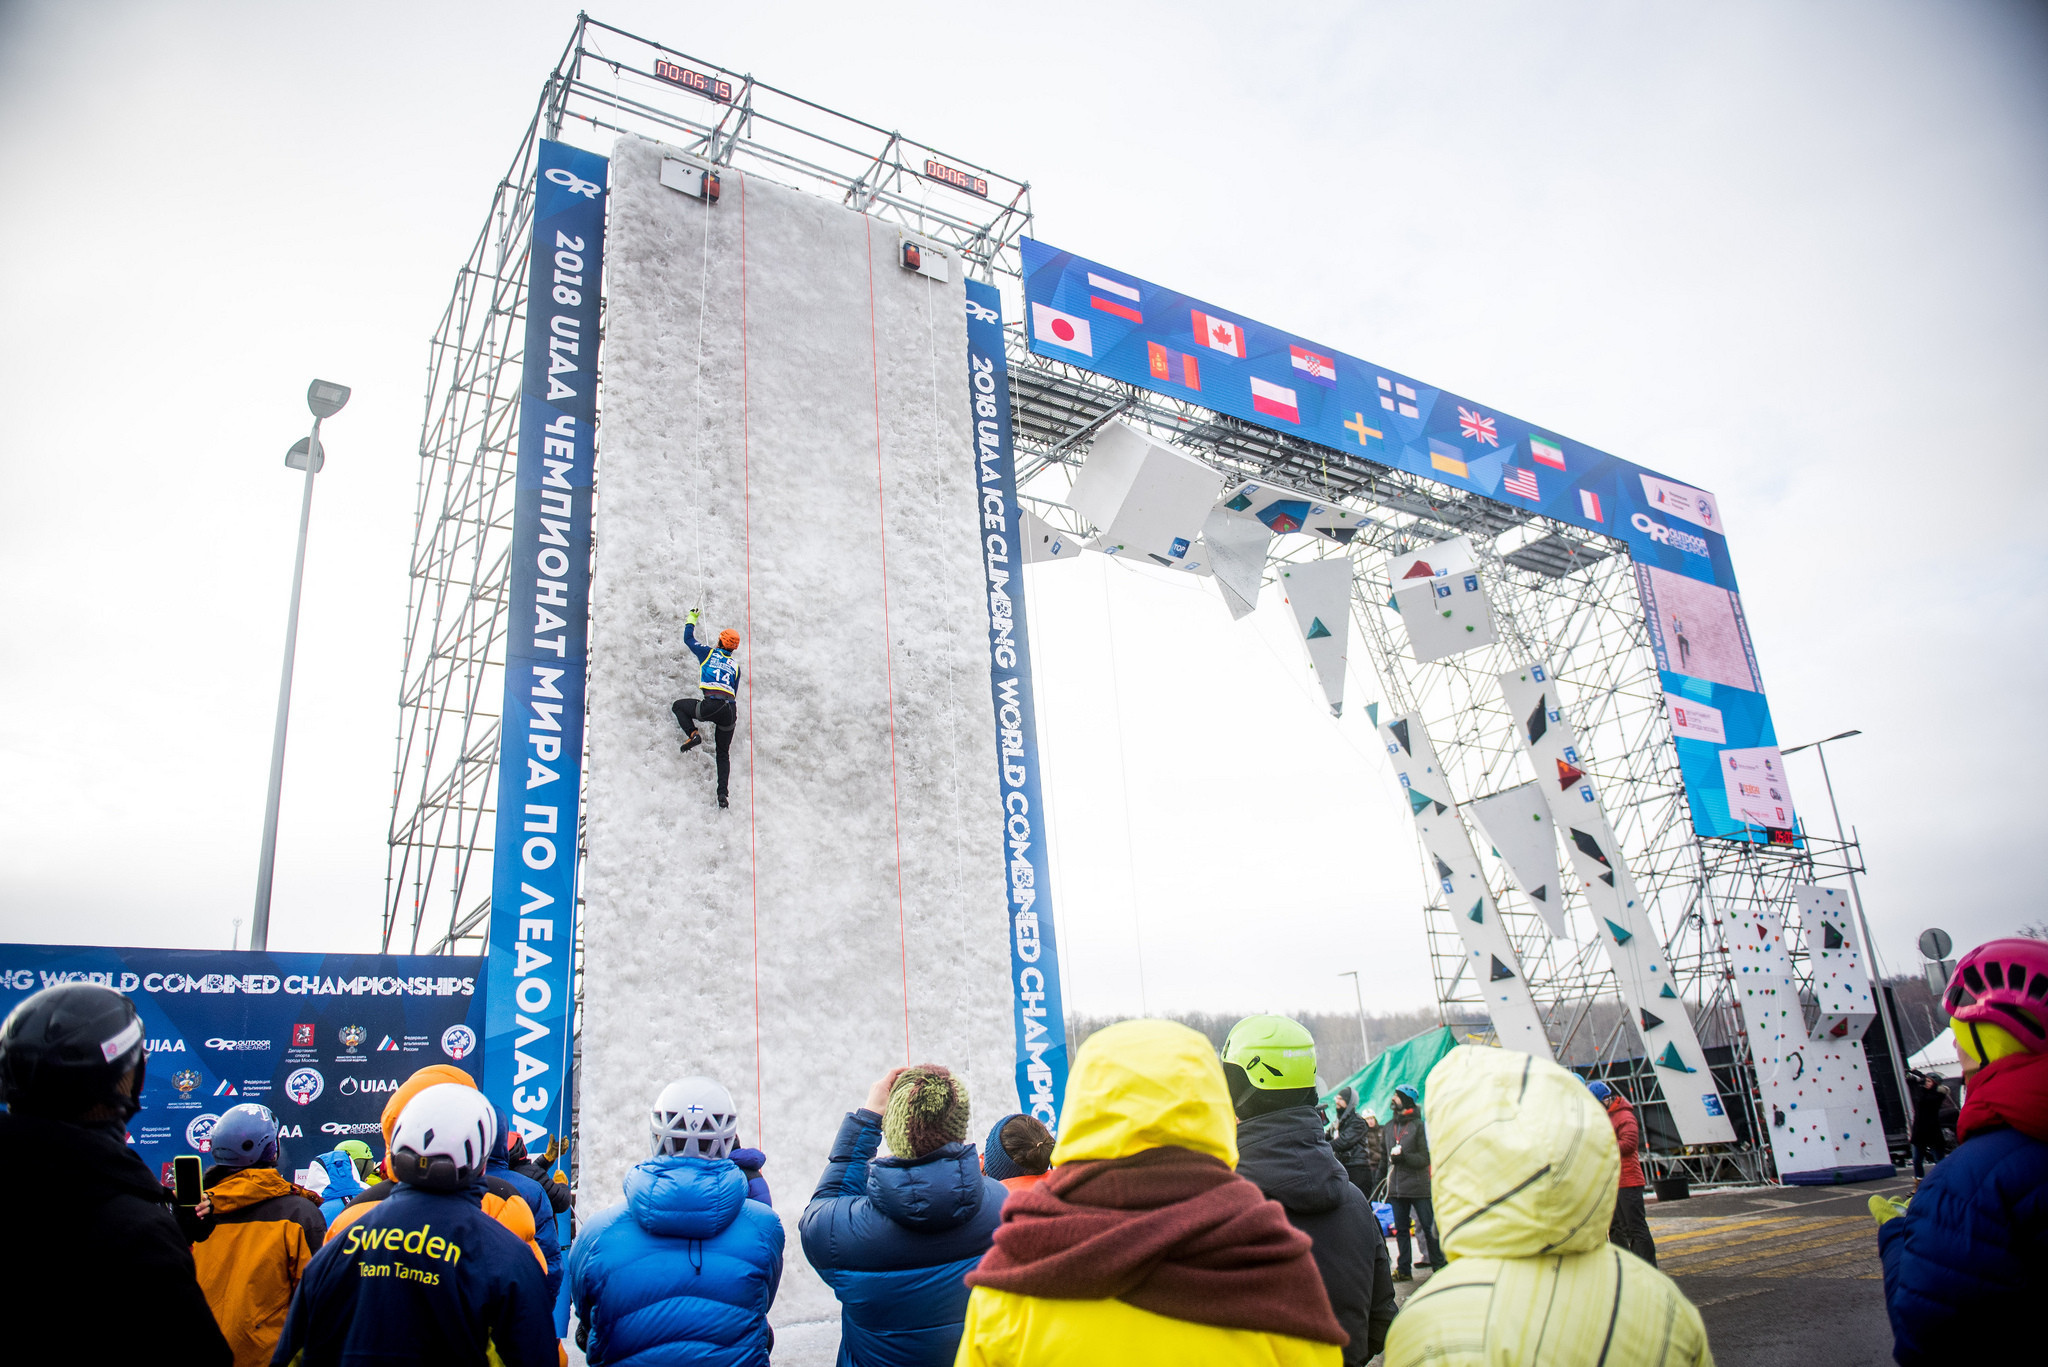 The climbing wall was positioned outside the Luzhniki Stadium in Moscow ©UIAA